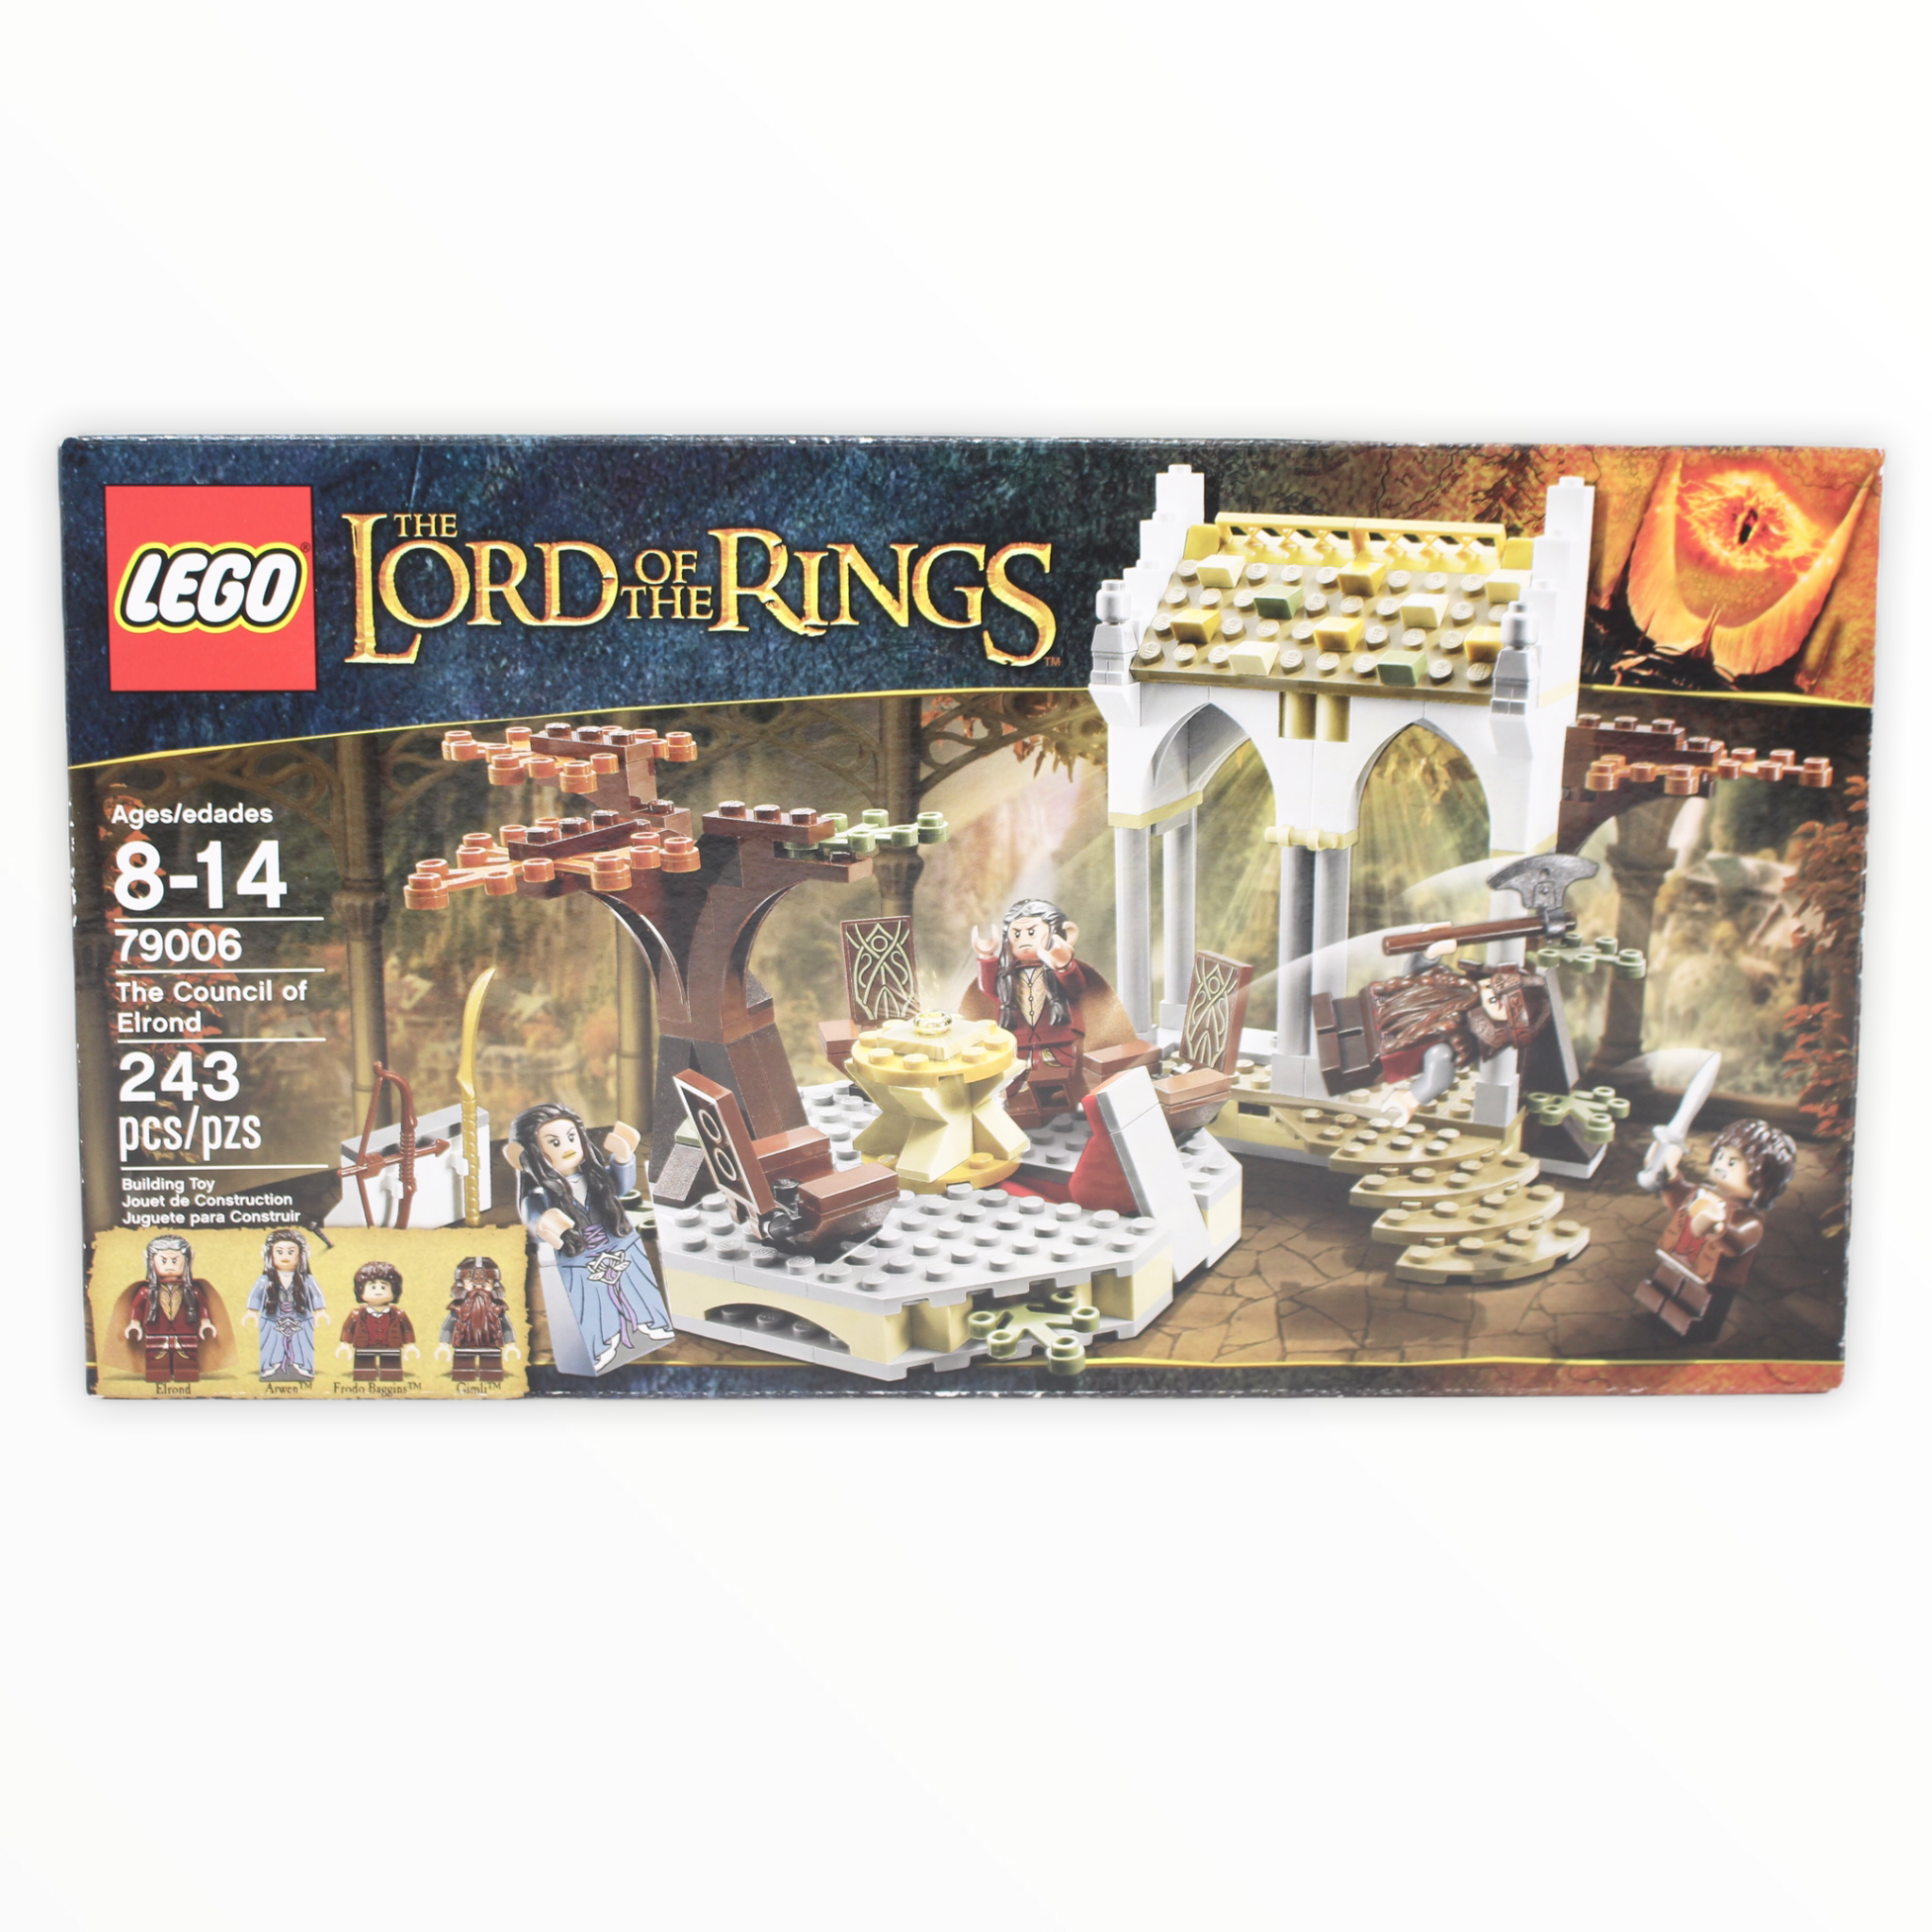 Certified Used Set 79006 The Lord of the Rings The Council of Elrond